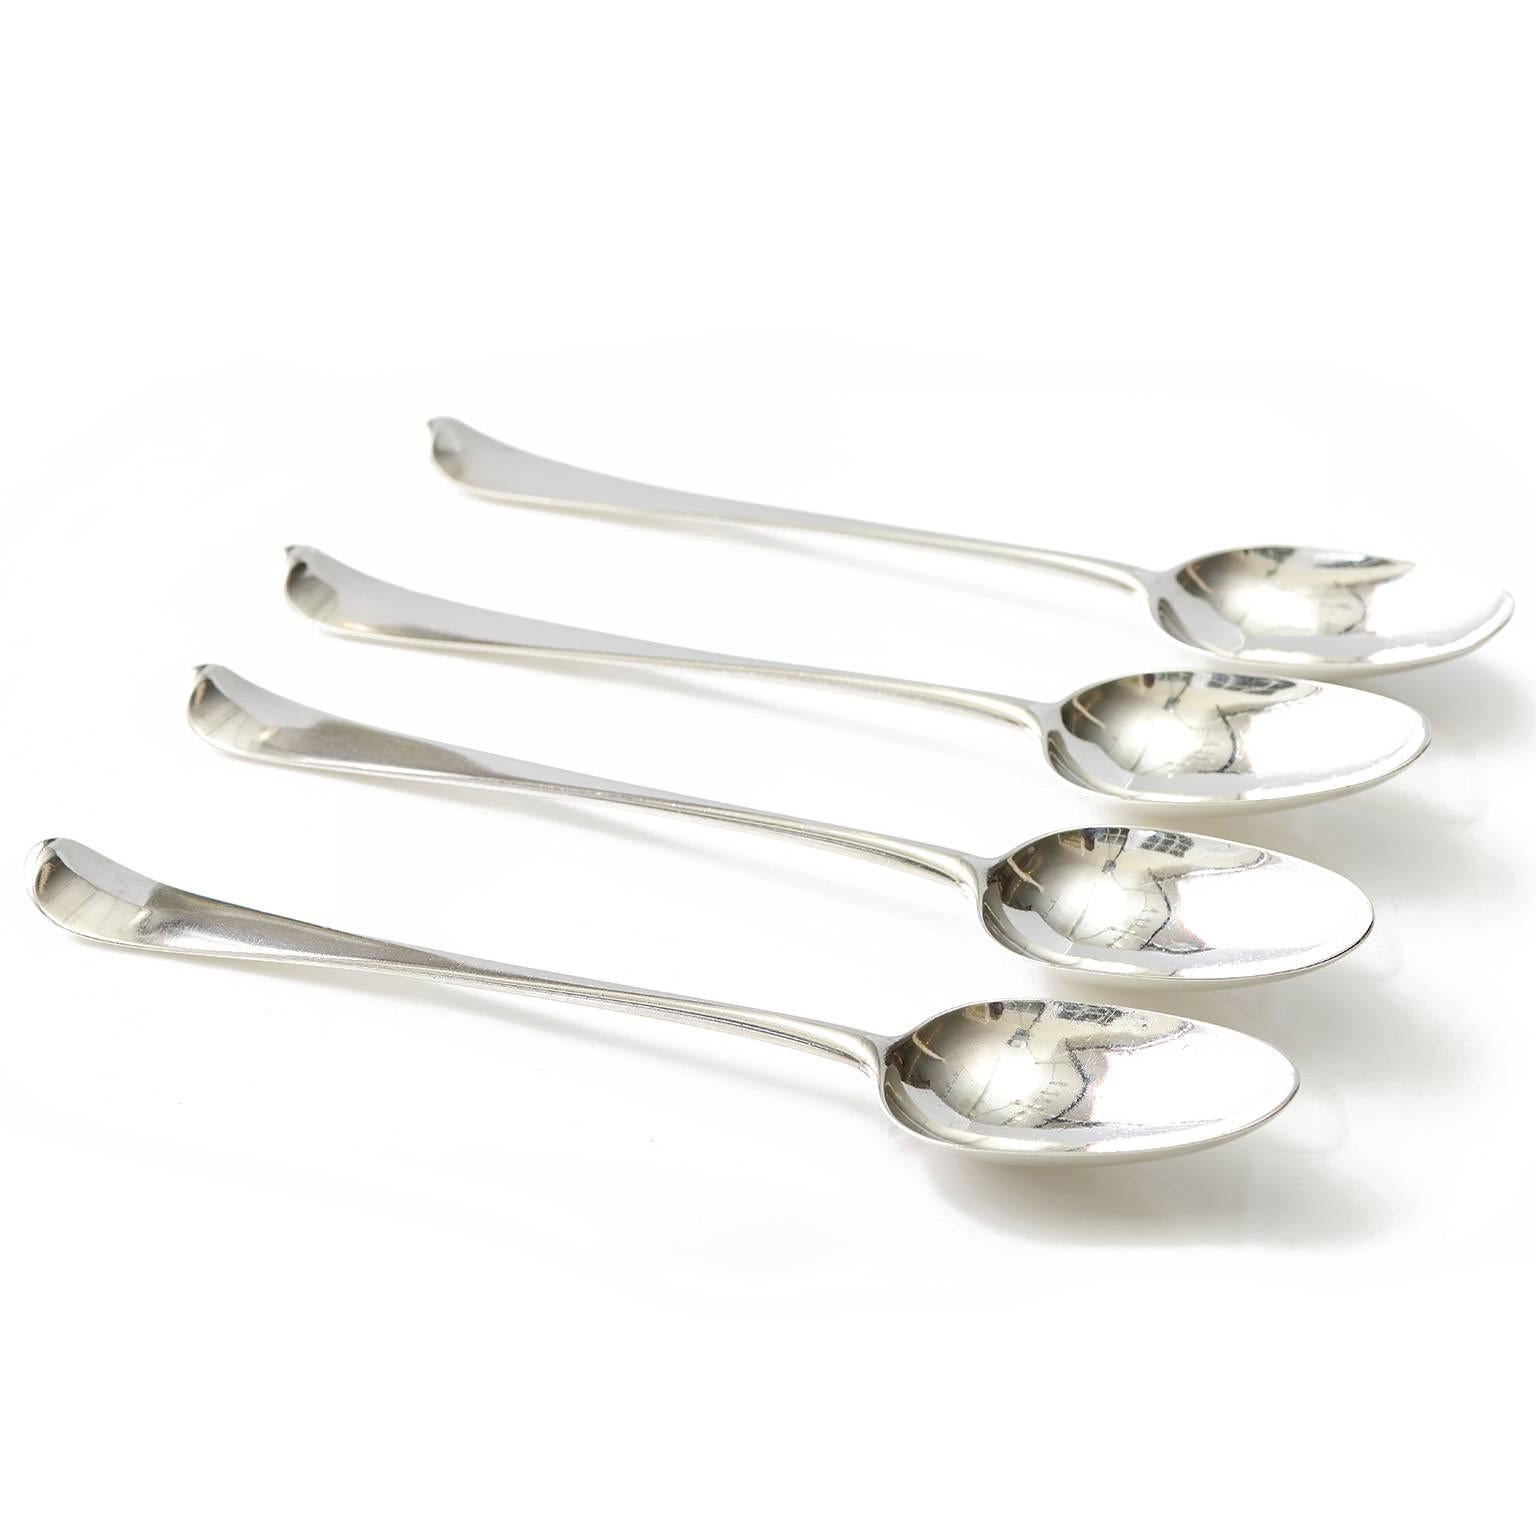 Circa 1750-51, Sterling, by Paul Callard, London, England. This classic set of four sterling basting or stuffing spoons by Paul Callard features sleek Georgian styling and superior London quality. Over 250 years old, they add decorative gravitas to